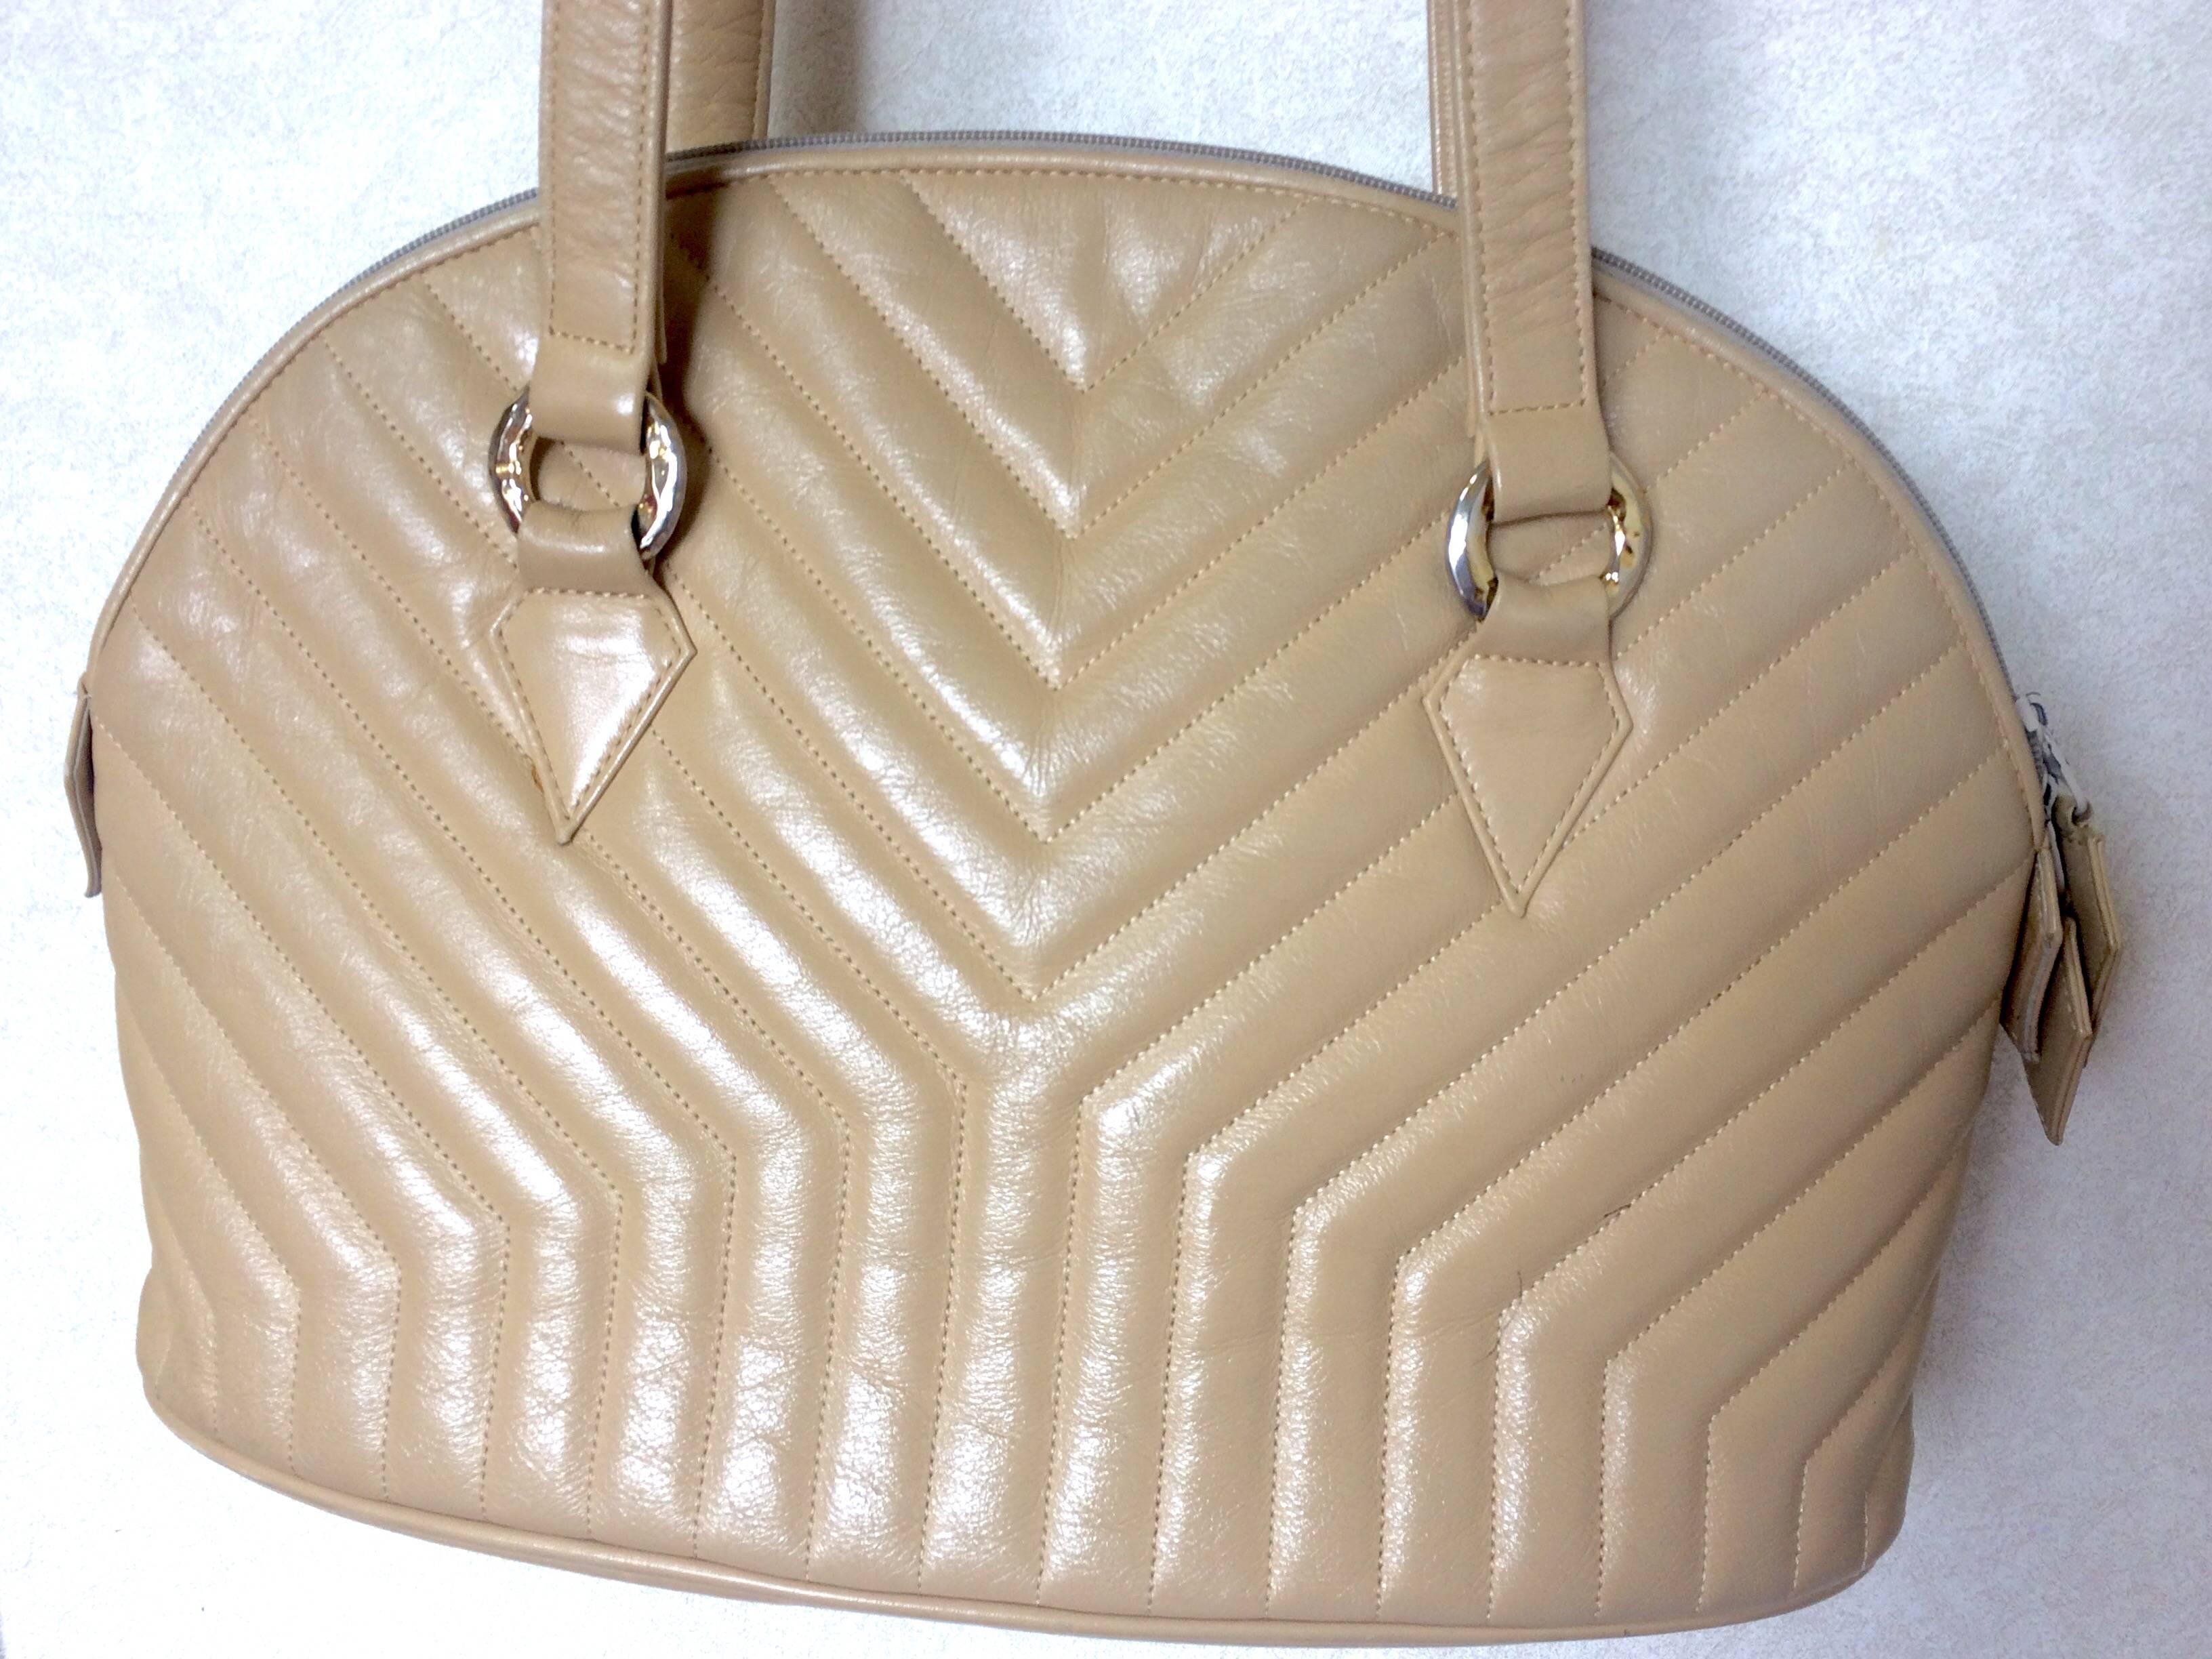 1990s. Vintage Yves Saint Laurent beige leather tote bag with Y, Chevron stitch in bolide purse shape. Perfect vintage bag from YSL back in the era.

Introducing a classic bolide shape design beige leather shoulder bag from Yves Saint Laurent in the